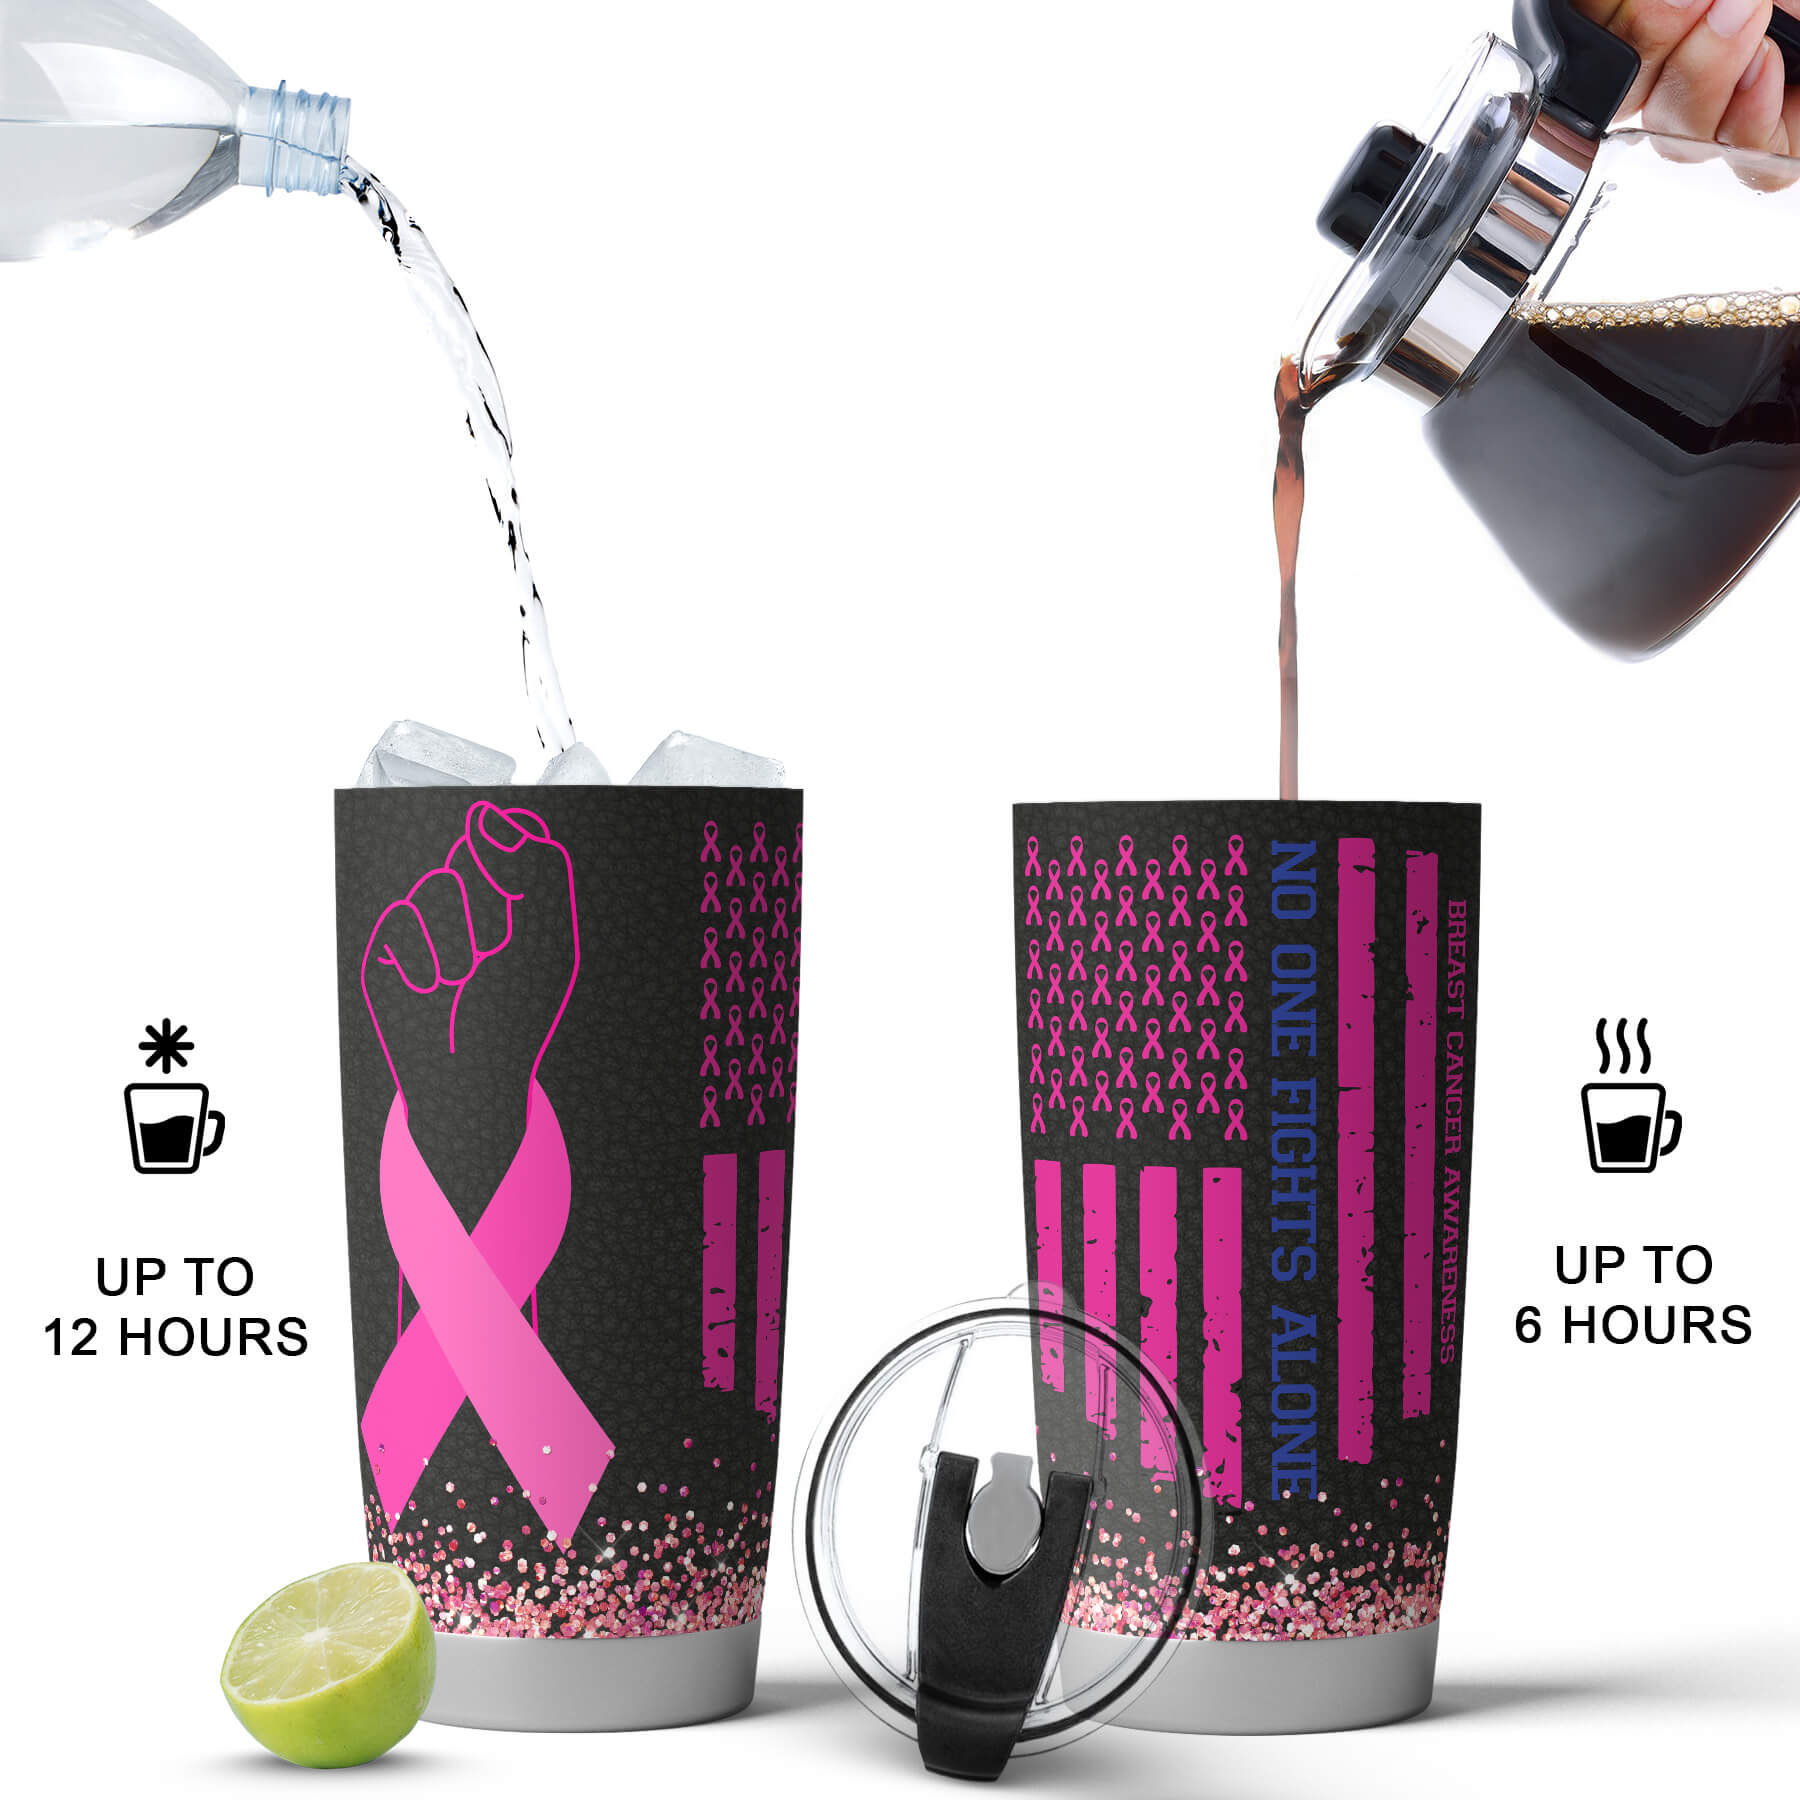 20oz Breast Cancer Awareness Stainless Steel Insulated Tumbler - Thoughtful Gift for Supporting the Cause - fancyfams